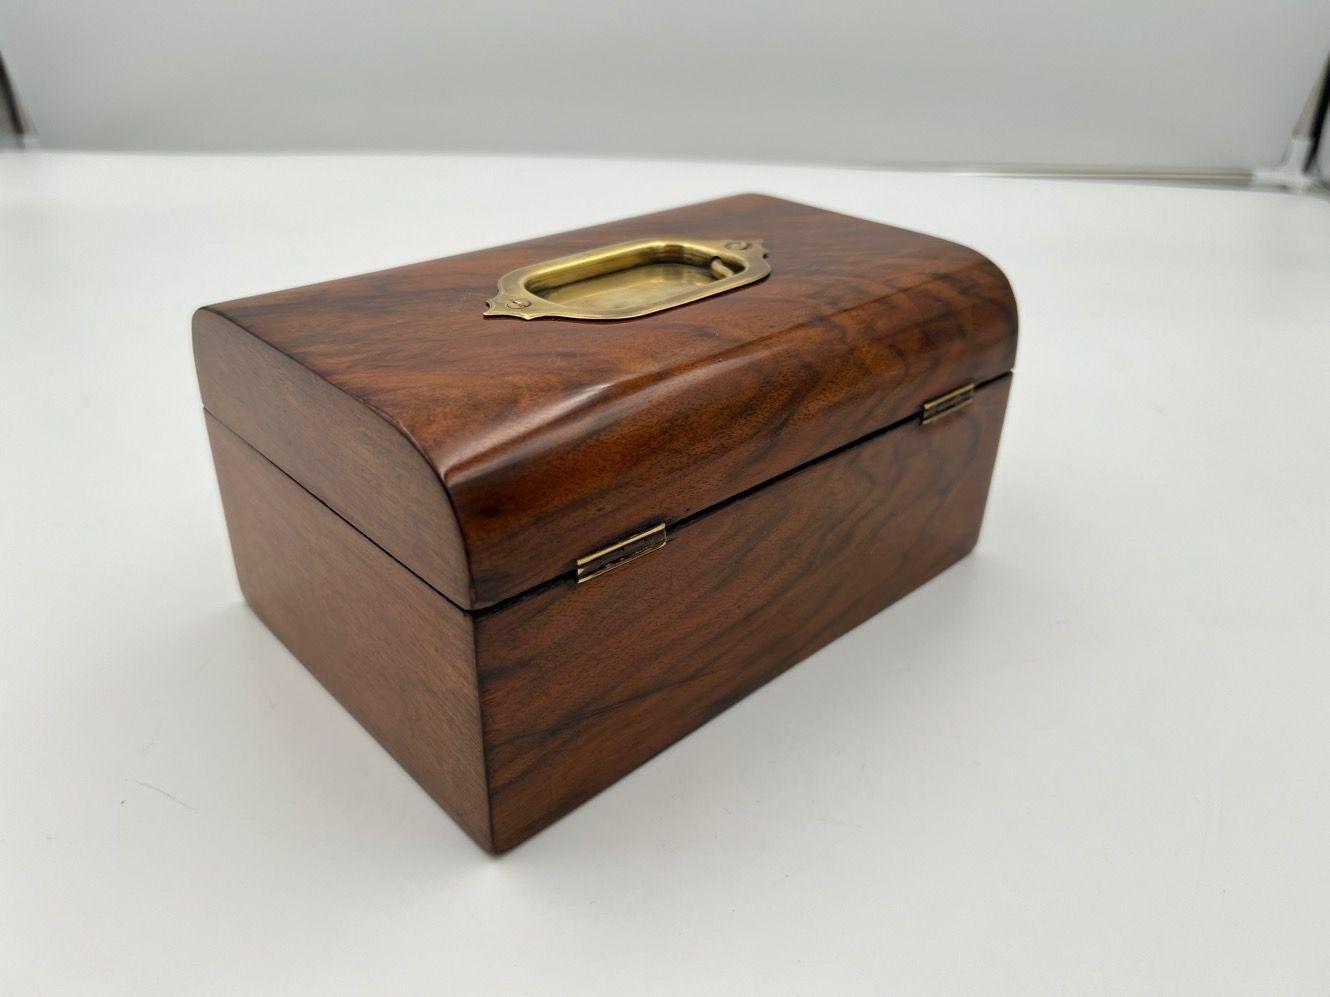 Antique Decorative Box, Walnut Veneer and Brass, South Germany, circa 1850 For Sale 2